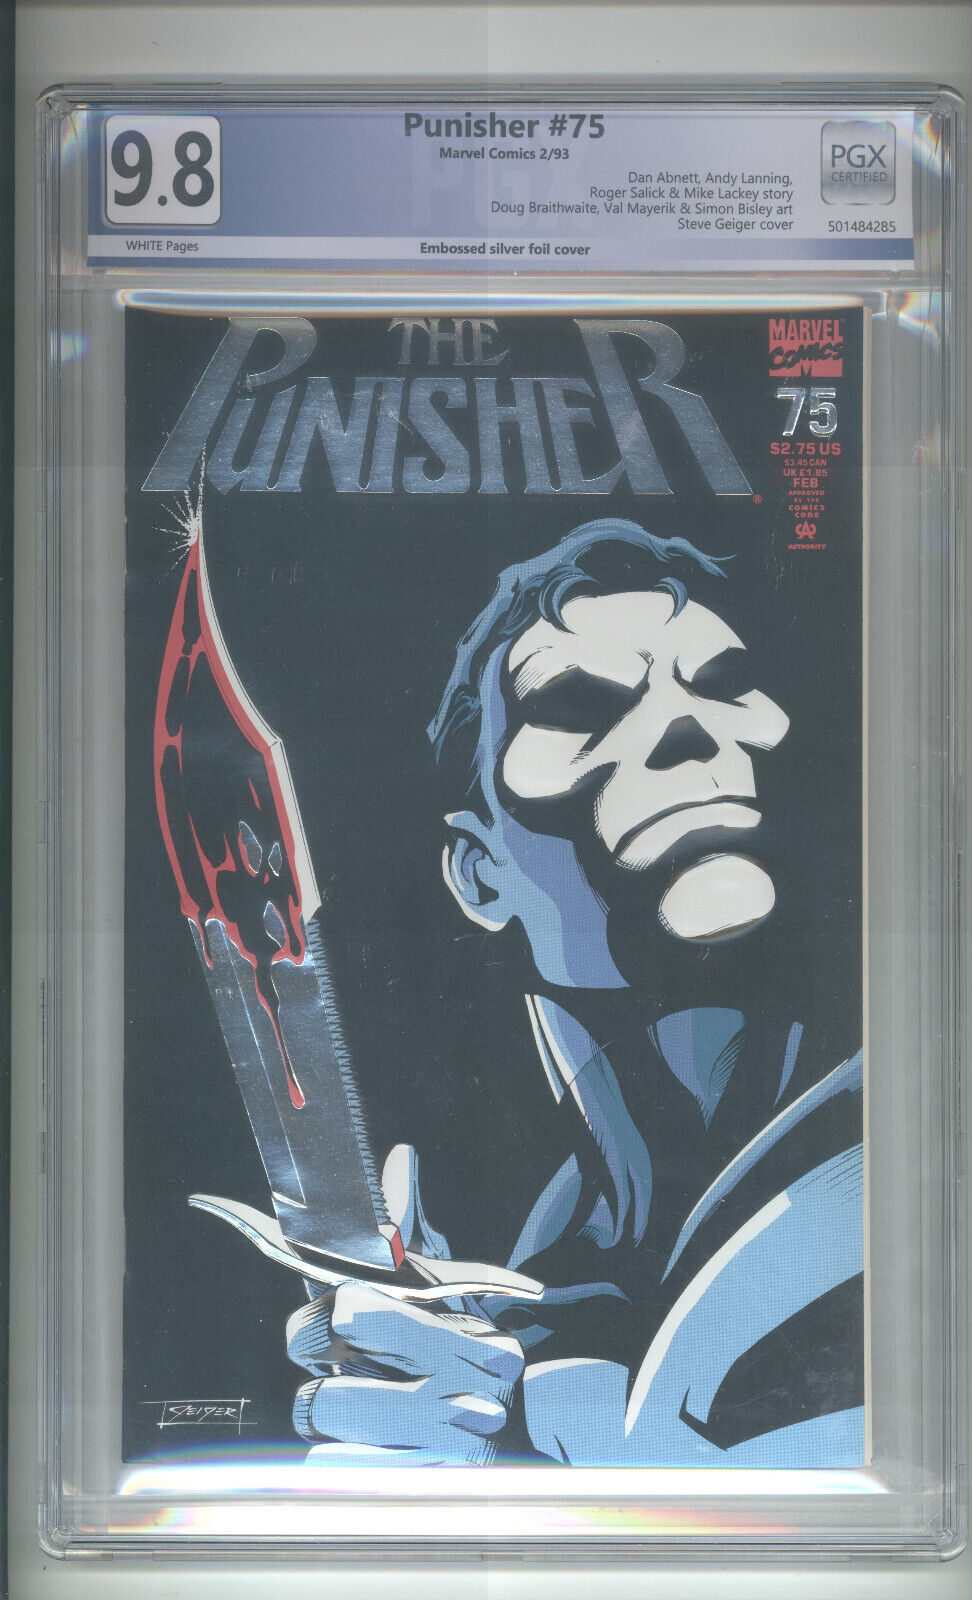 PUNISHER #75 PGX  9.8, EMBOSSED SILVER FOIL COVER, 1993